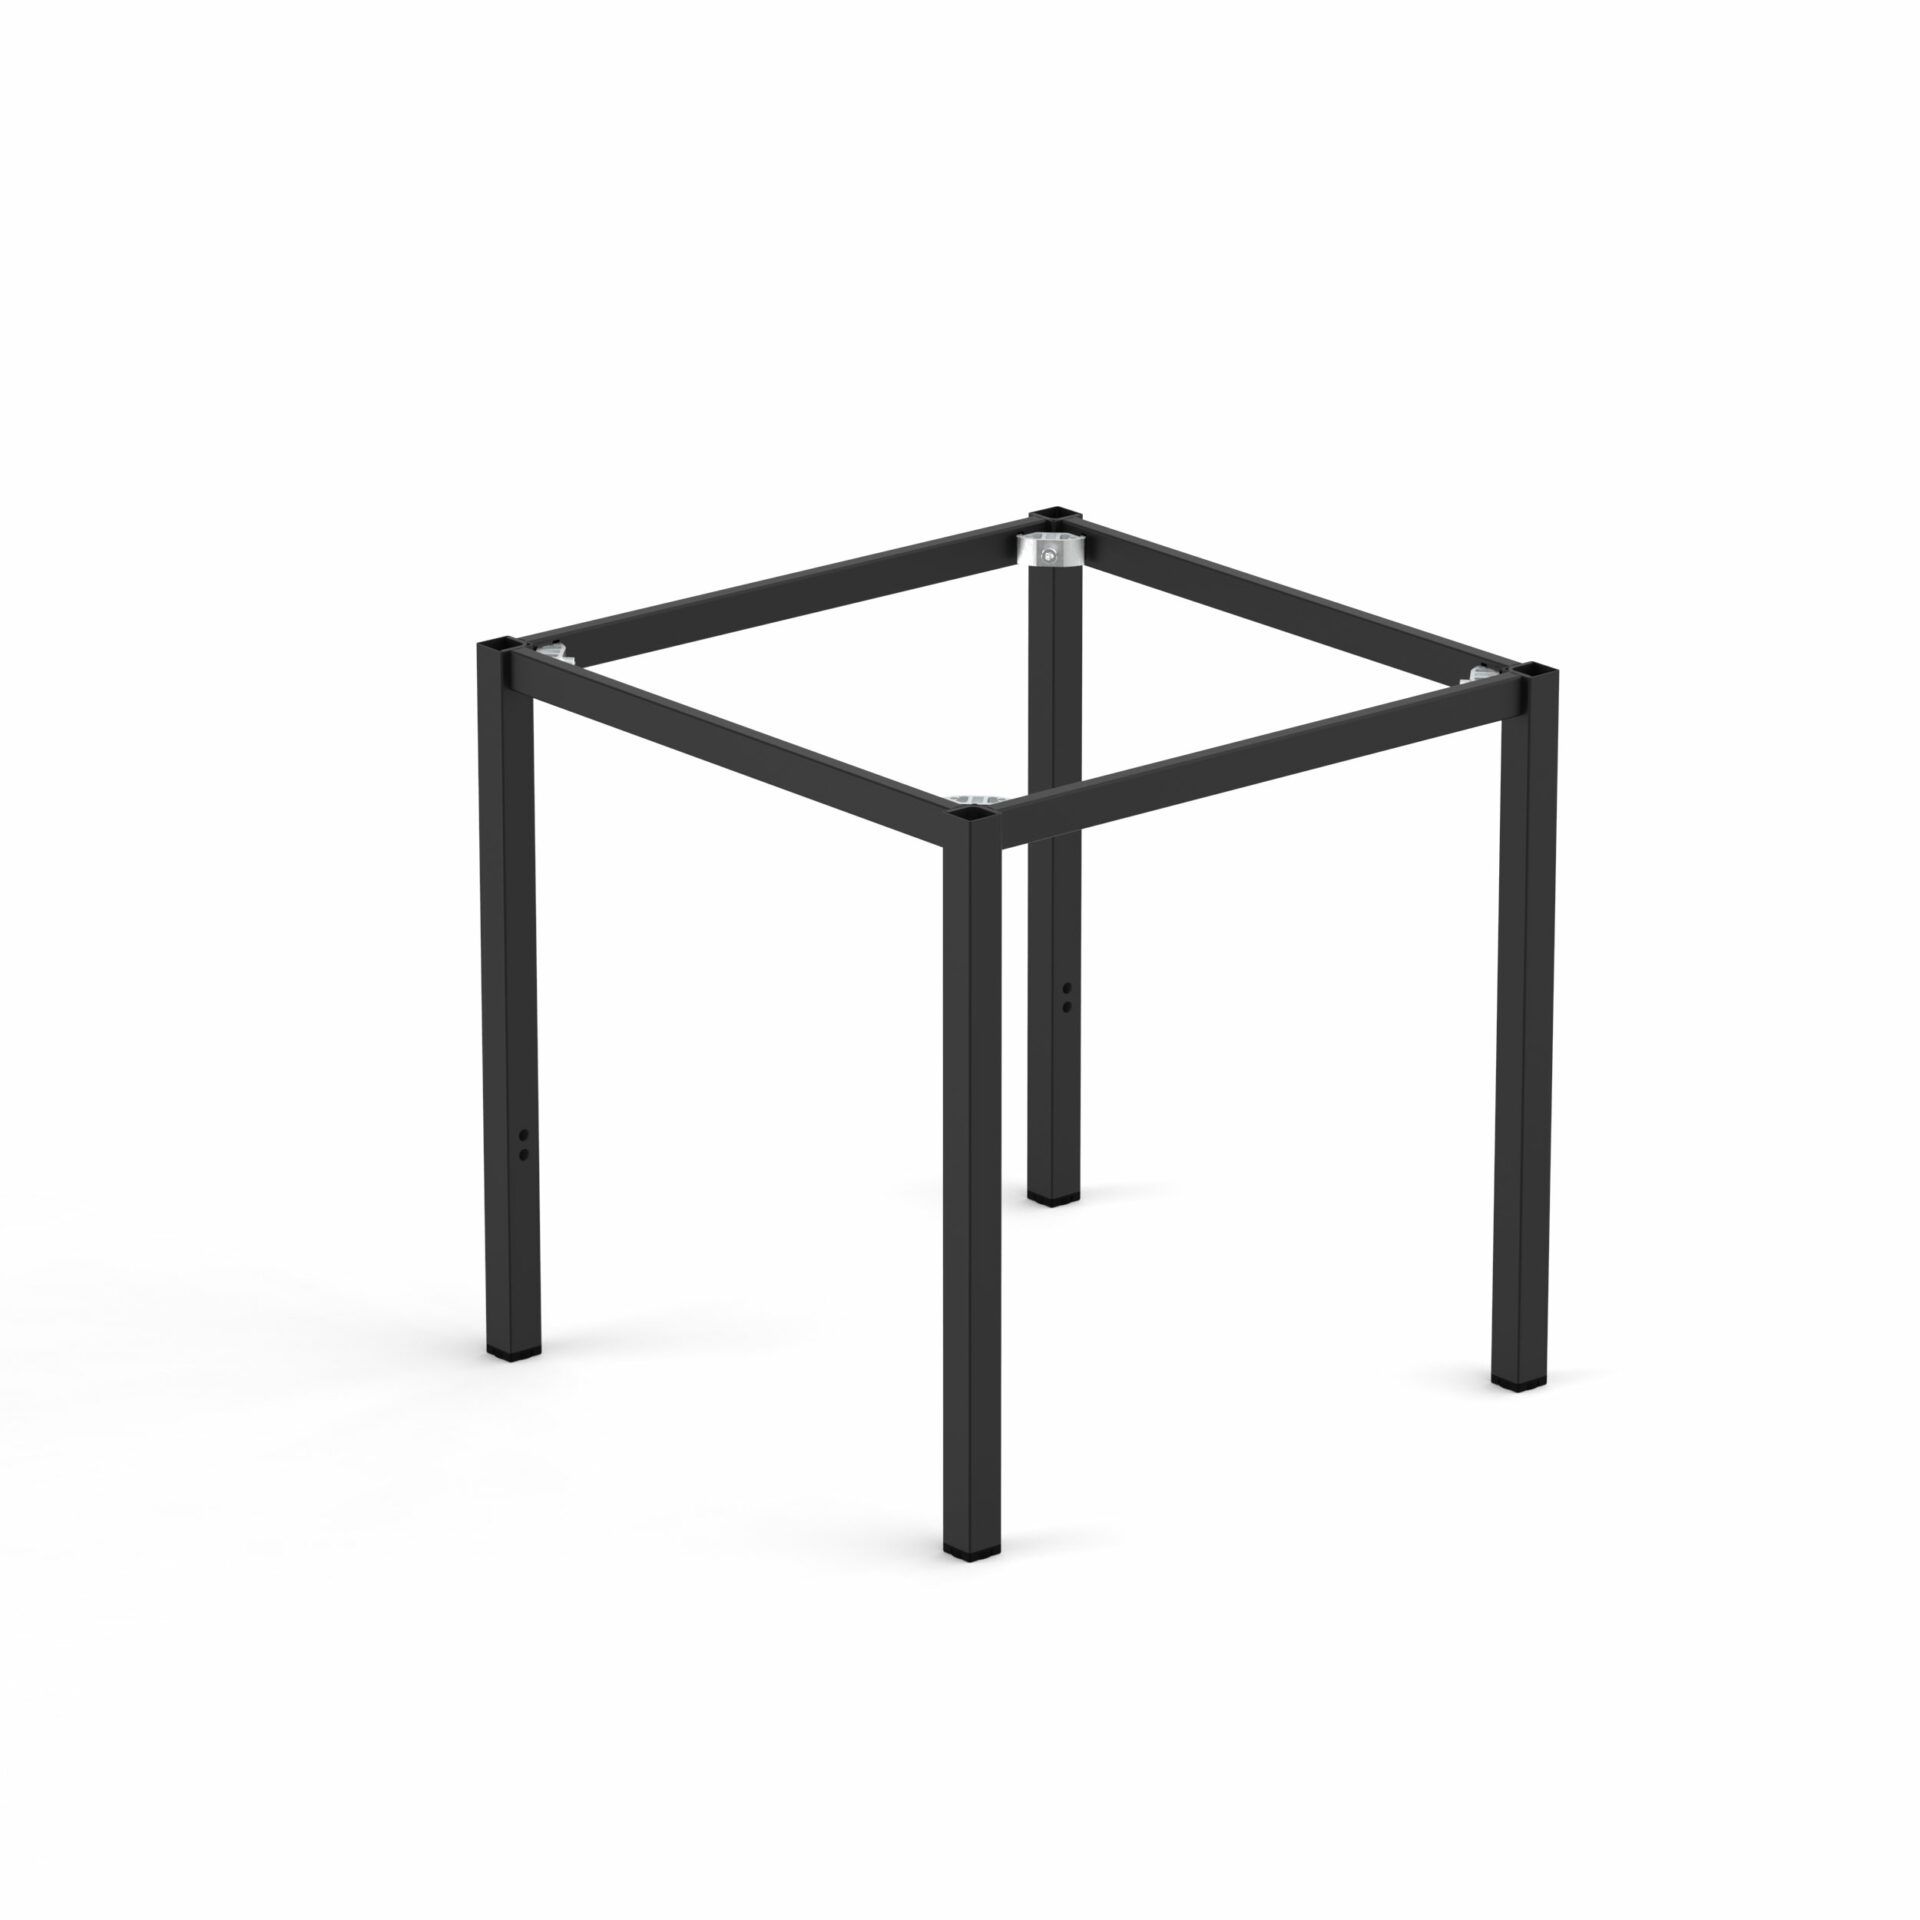 Spire Square leg Table Height Frame 740 x 590 x 720H